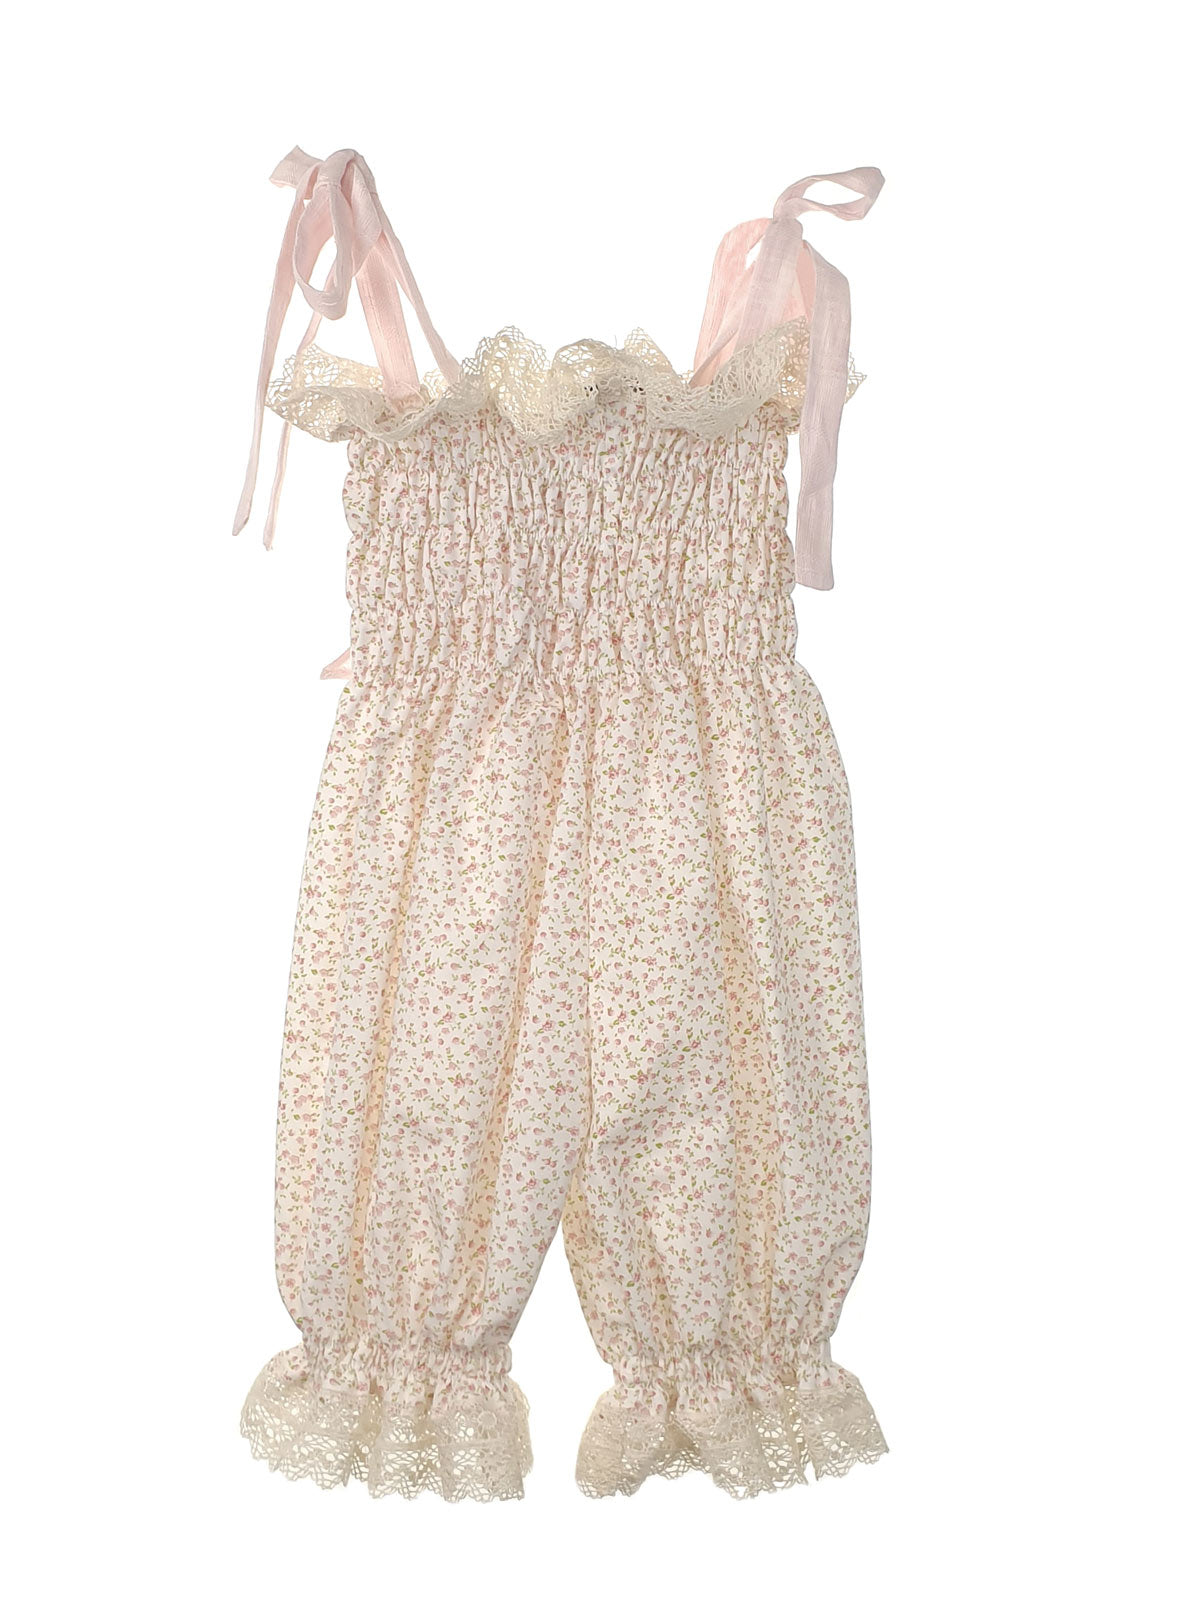 Baby Girl's floral cotton overall - MARLENA